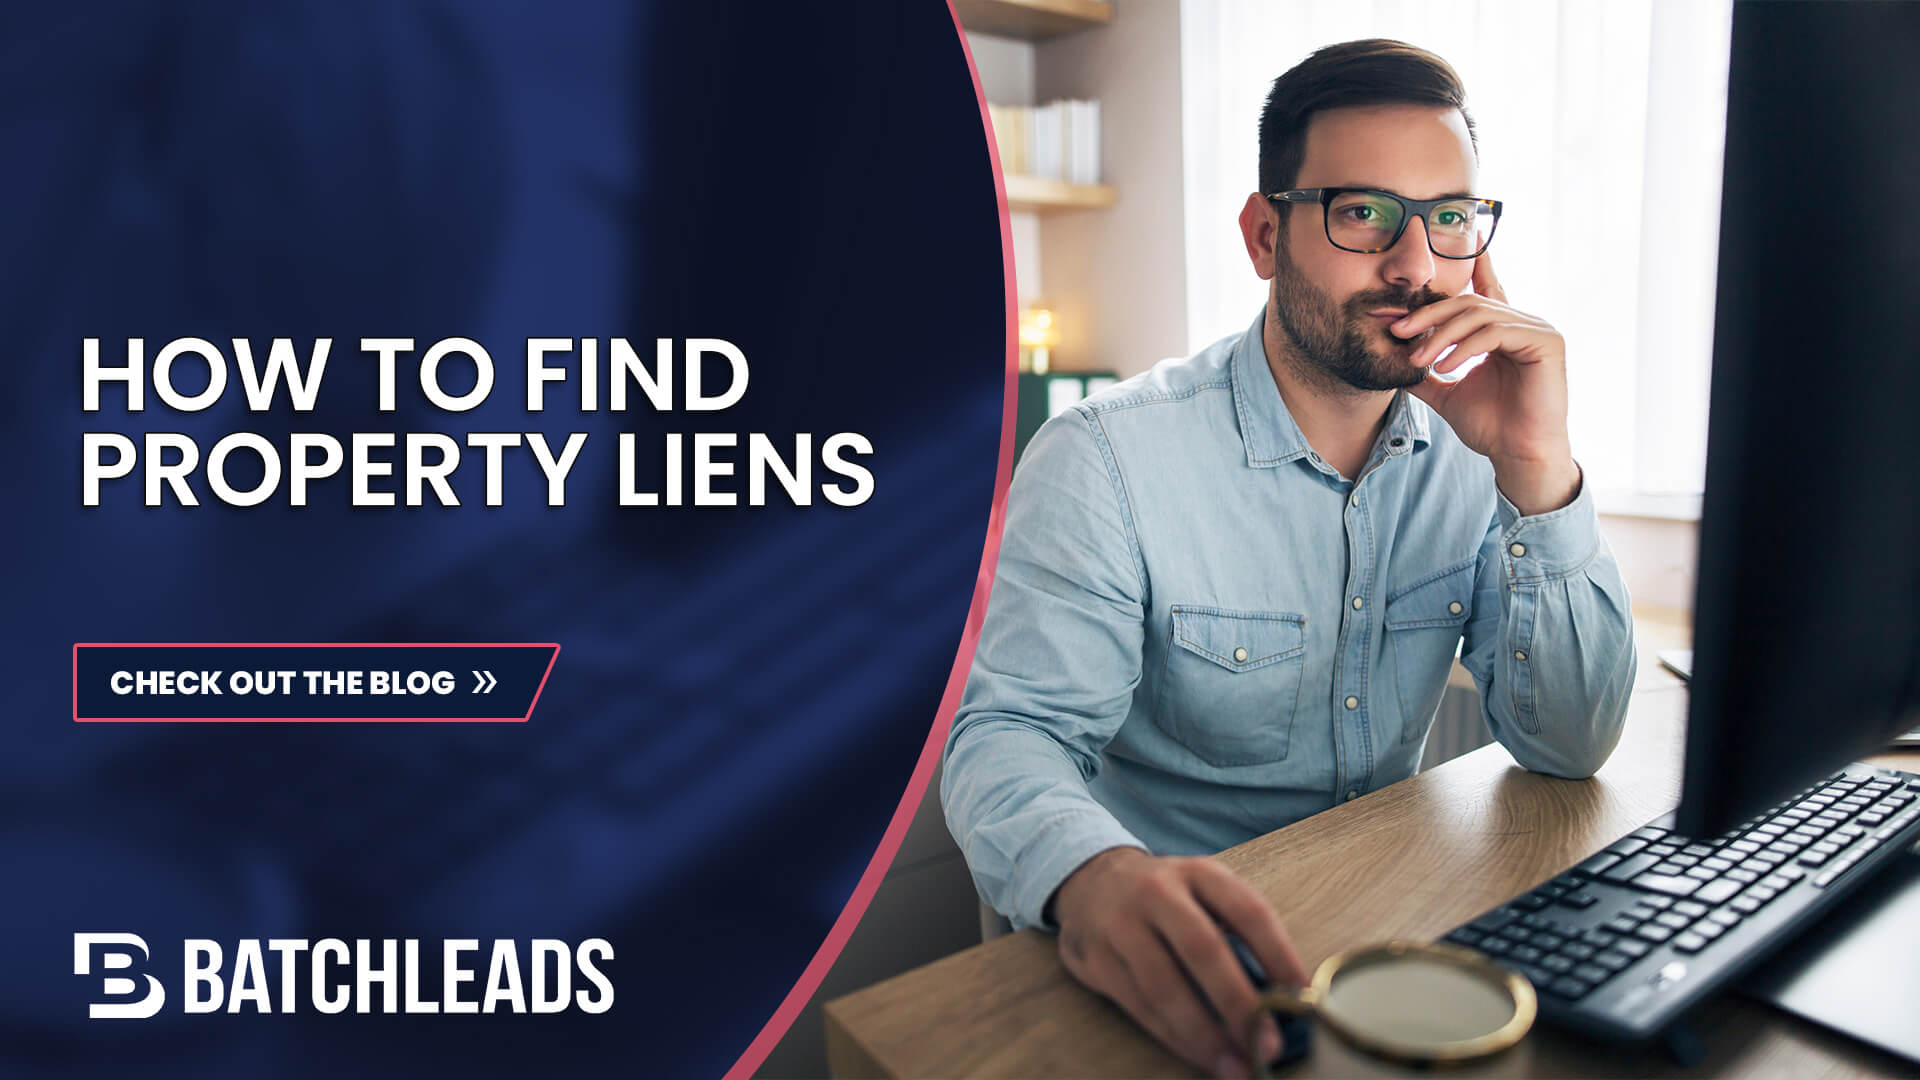 HOW TO FIND PROPERTY LIENS